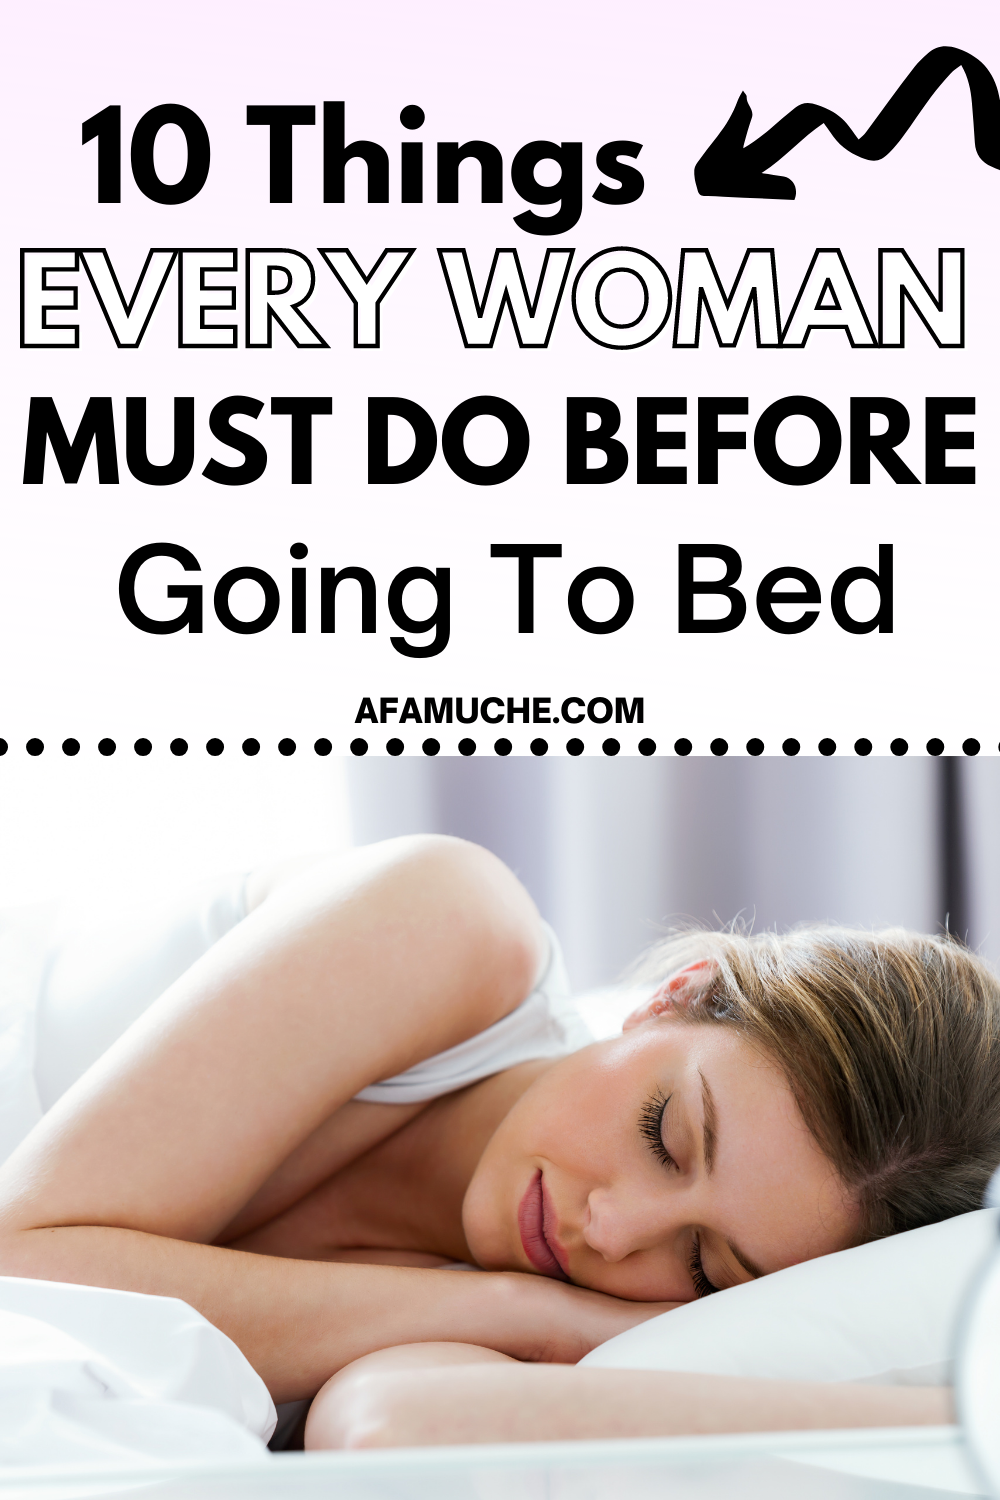 10 Things every woman must do before going to bed in 2021